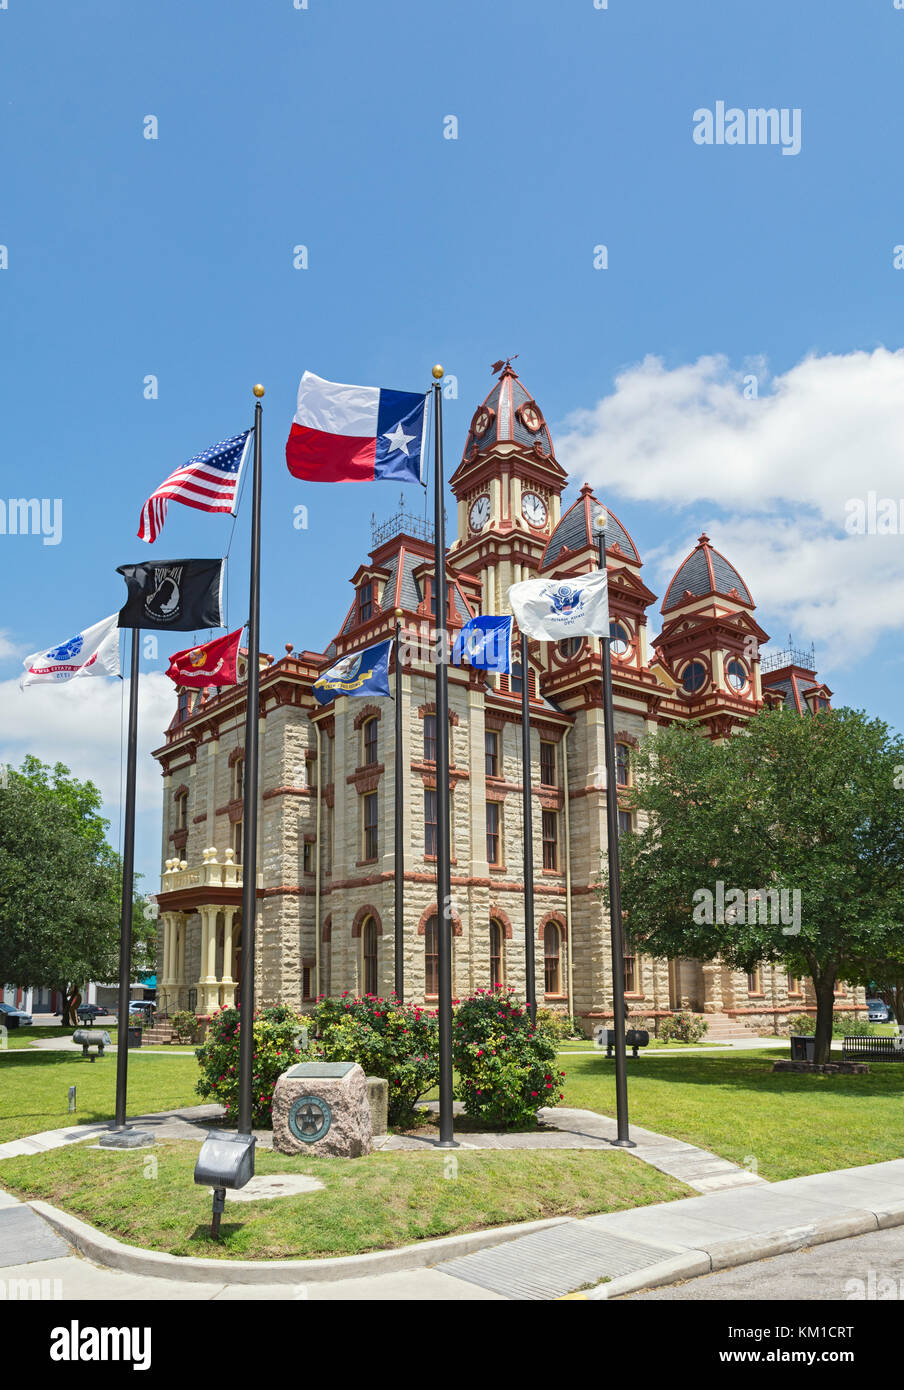 Texas, Lockhart, Caldwell County Courthouse, construit 1894 Banque D'Images